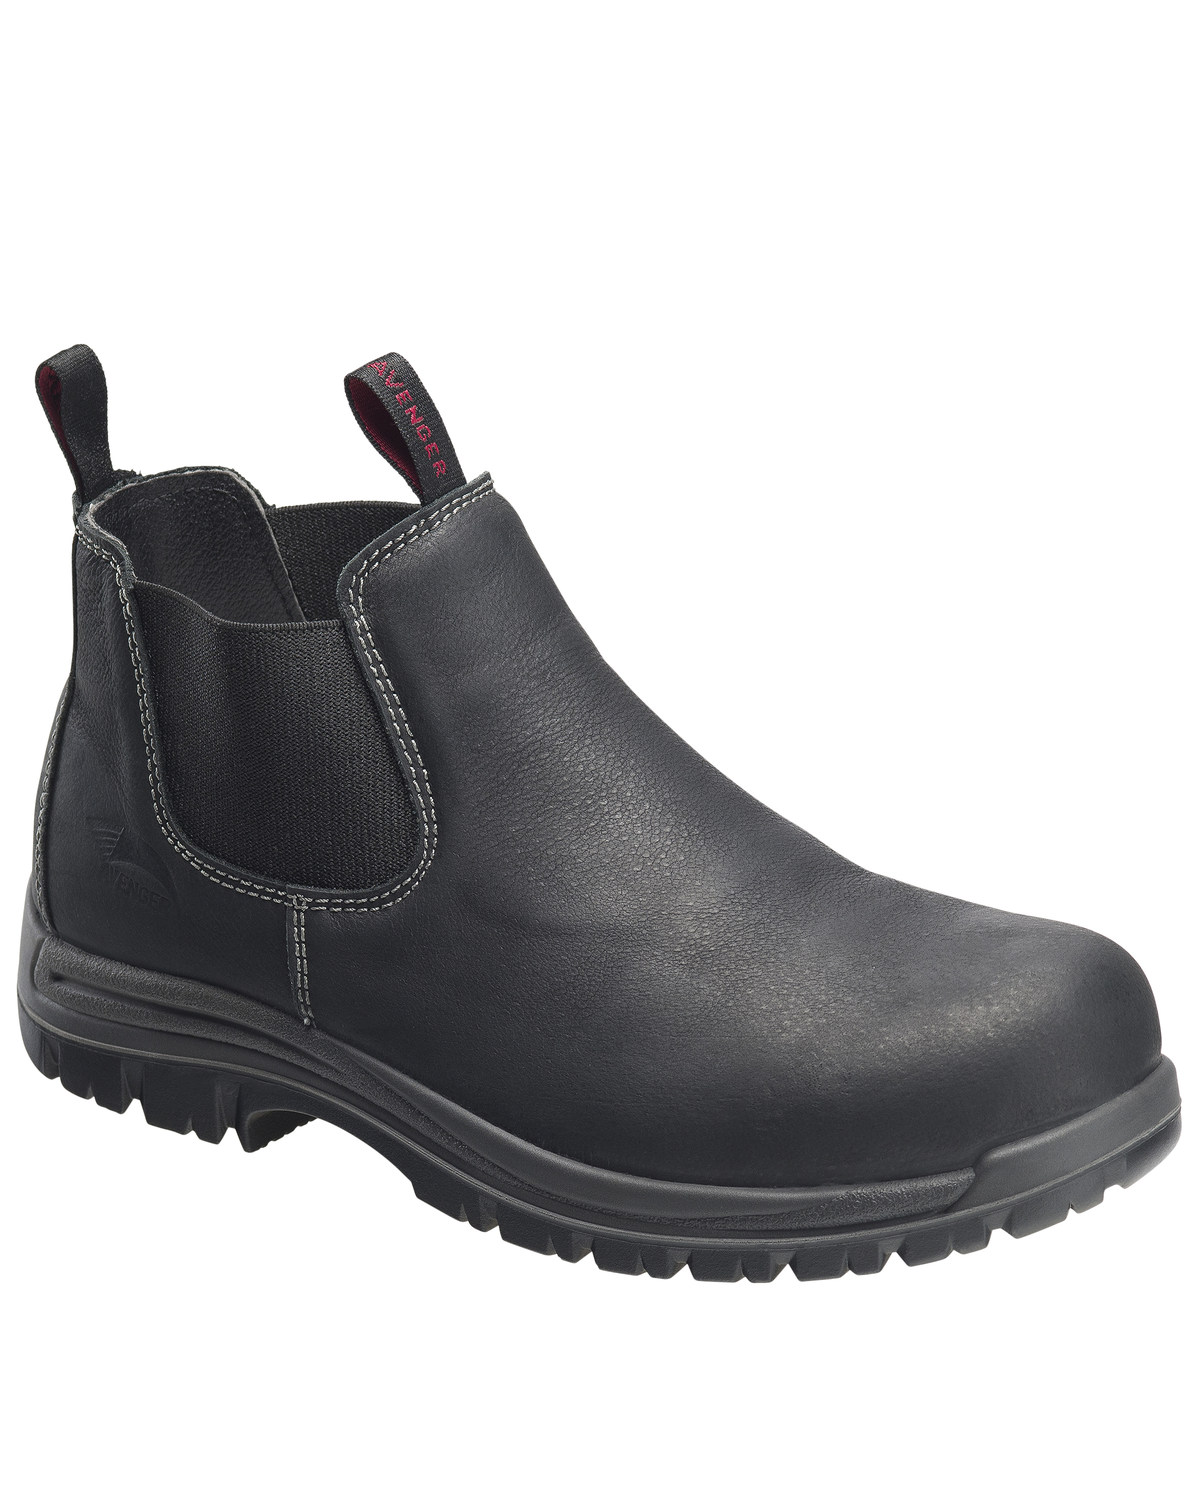 black pull on duty boots